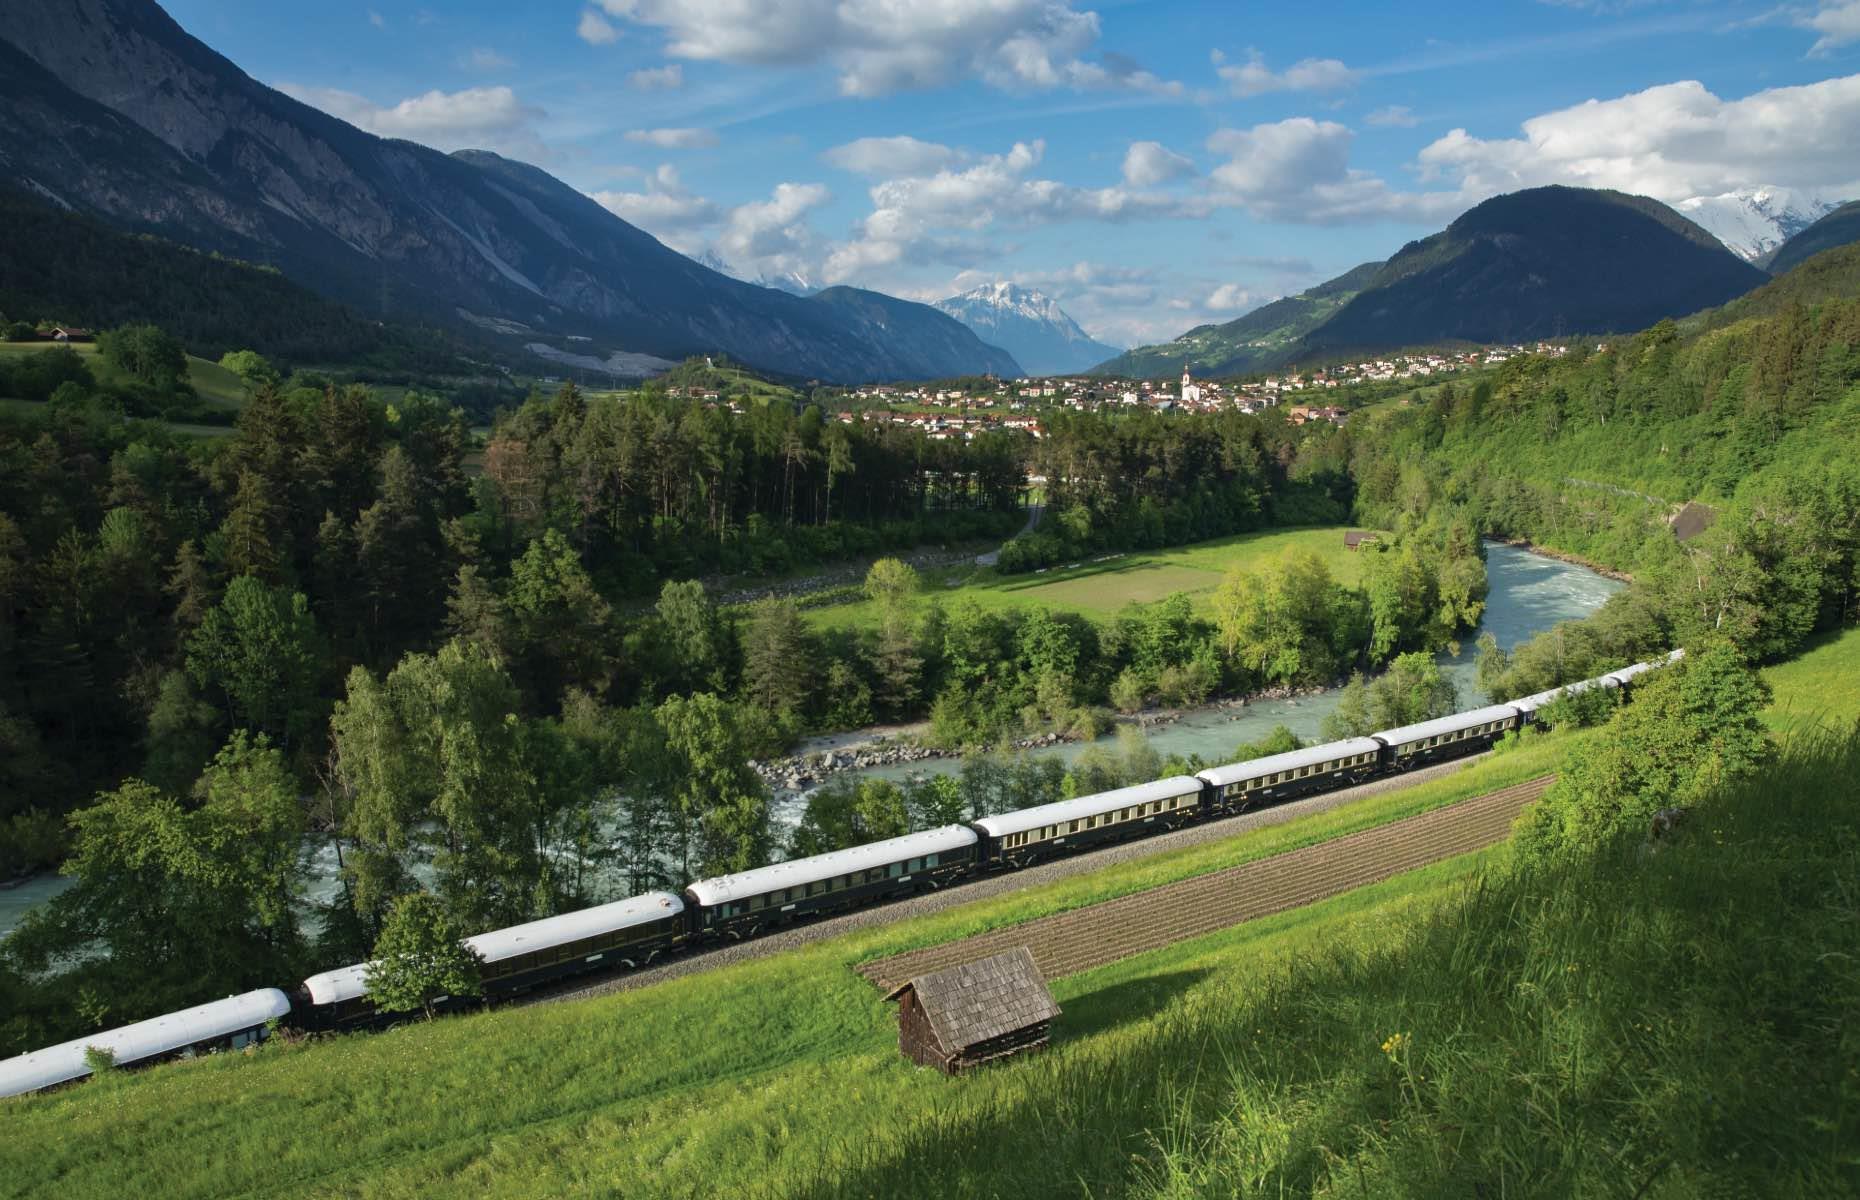 <p>For a no-expense-spared, once-in-a-lifetime trip, look no further than this route between London and Verona. With an aim to evoke the romance and grandeur of old-school railway journeys, the stunning Art Deco <a href="https://www.belmond.com/trains/europe/venice-simplon-orient-express/">Venice Simplon-Orient-Express</a> is a chance to see rolling Italian countryside and iconic European cities in style. The new European ‘Grand Tour’ routes also include stops in Rome and Florence, and stretches to Switzerland, Belgium and the Netherlands too, with options to add hotel stays.</p>